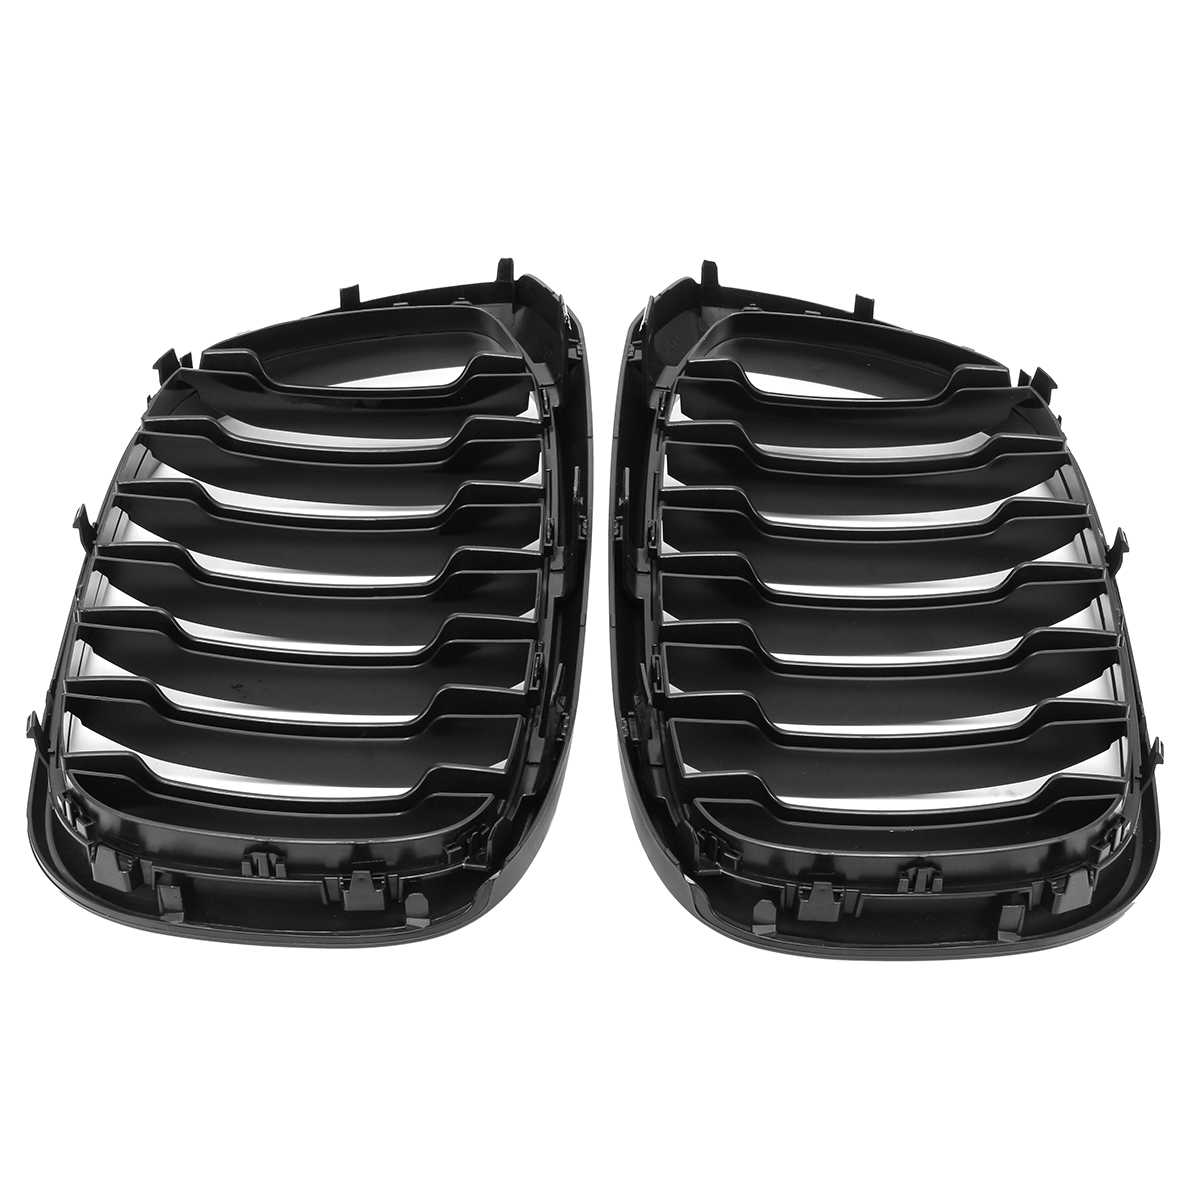 Pair Grill Front Hood Kidney Bumper Grille For BMW G01 G08 X3 G02 X4 2018-2022